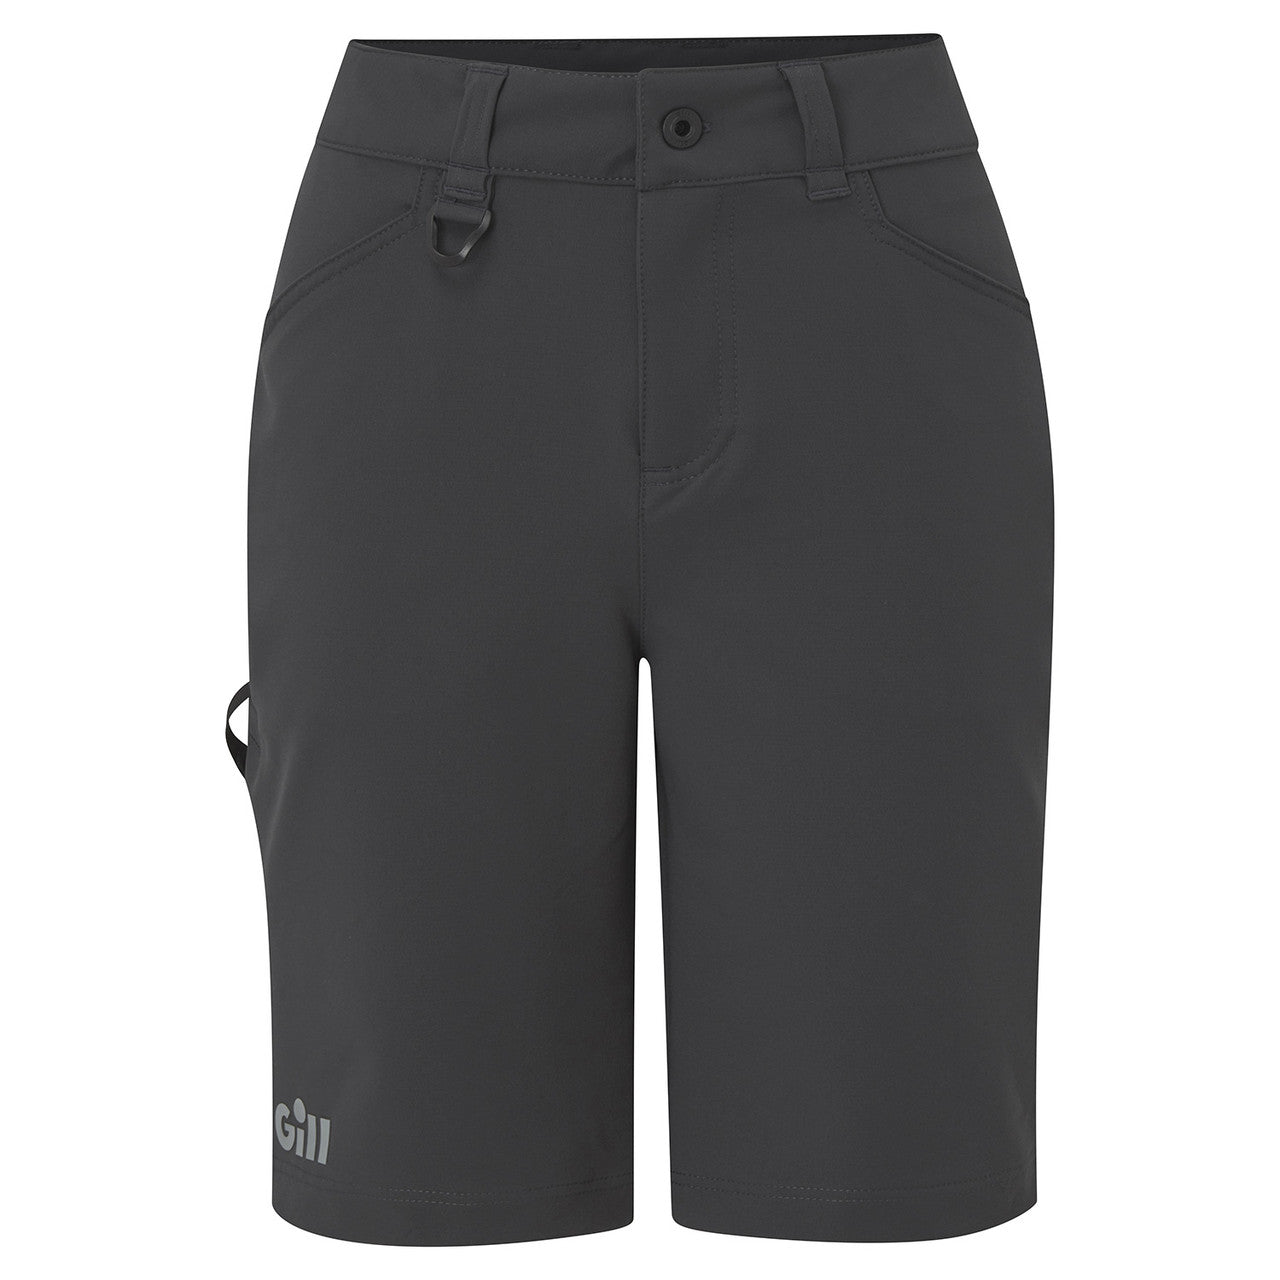 GILL Pro Expedition Women's Shorts